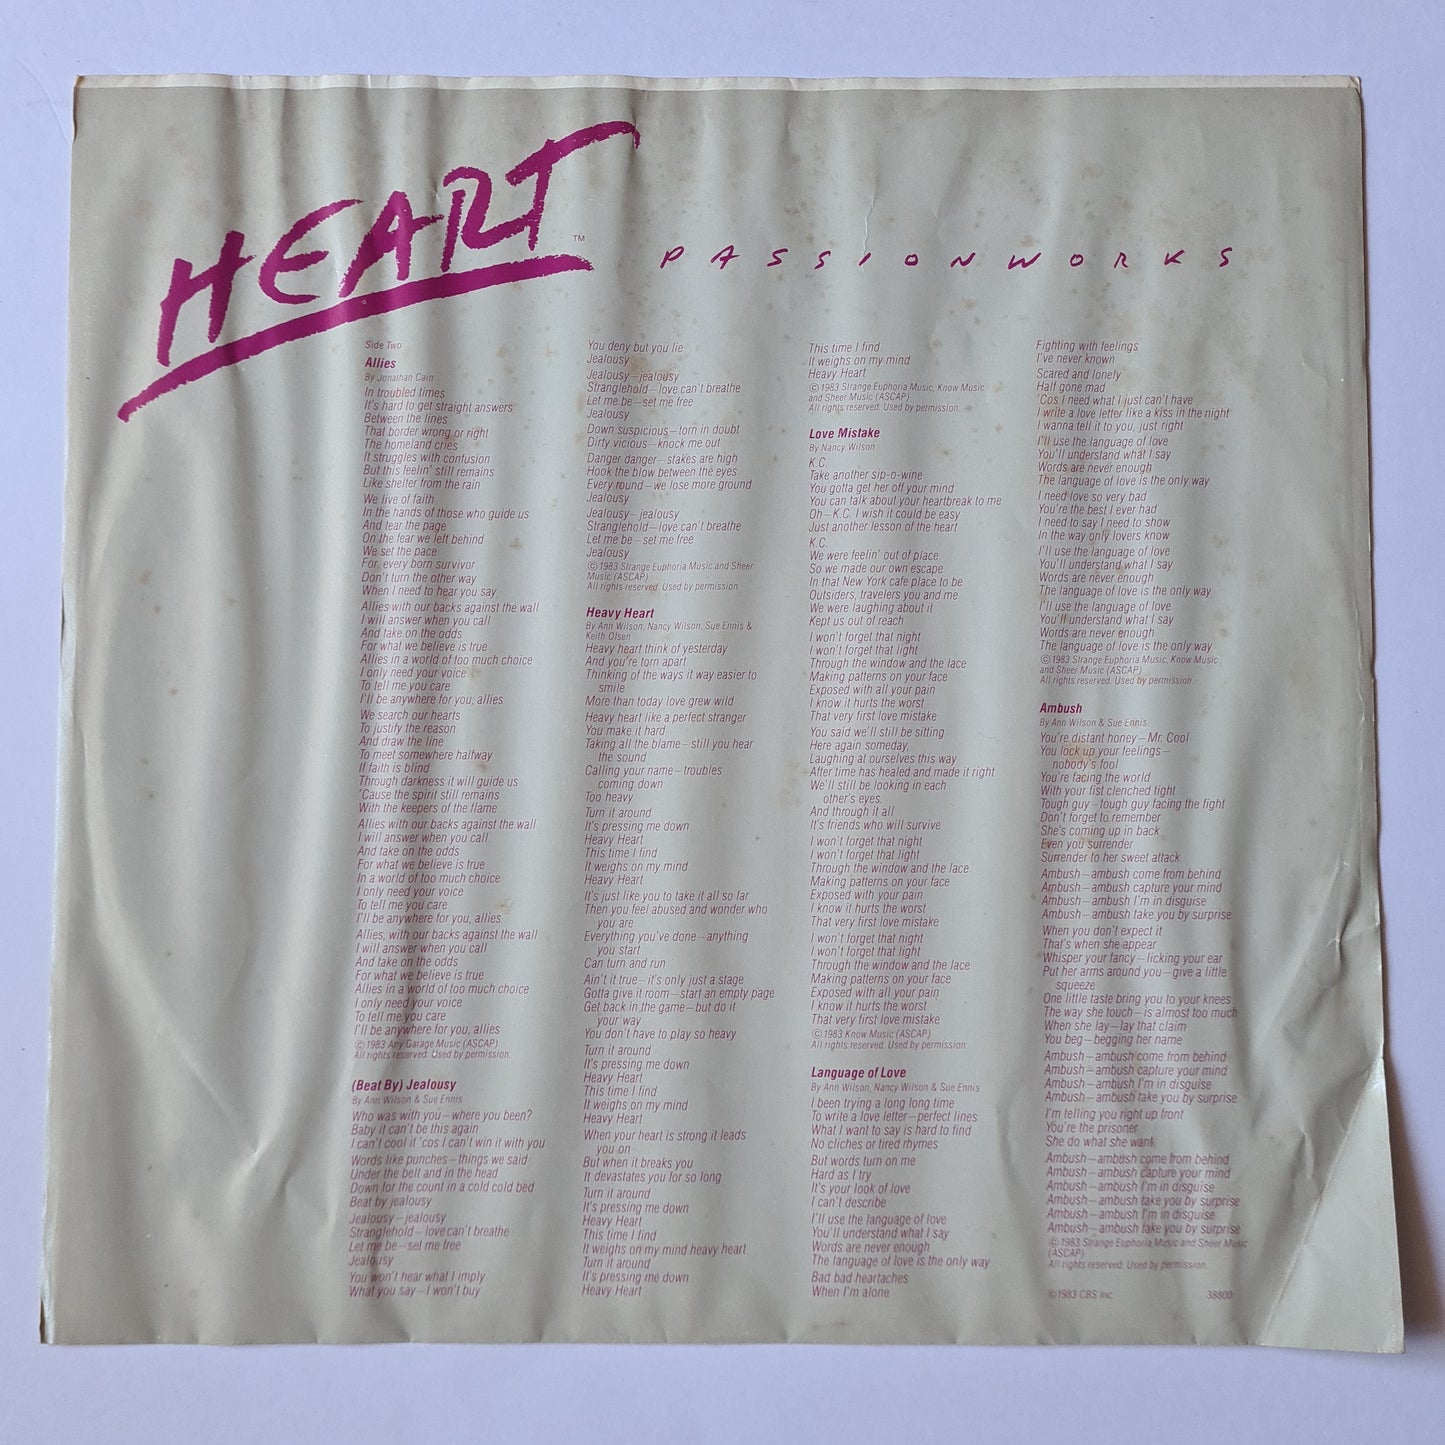 Heart – Passion Works - 1983 - Vinyl Record